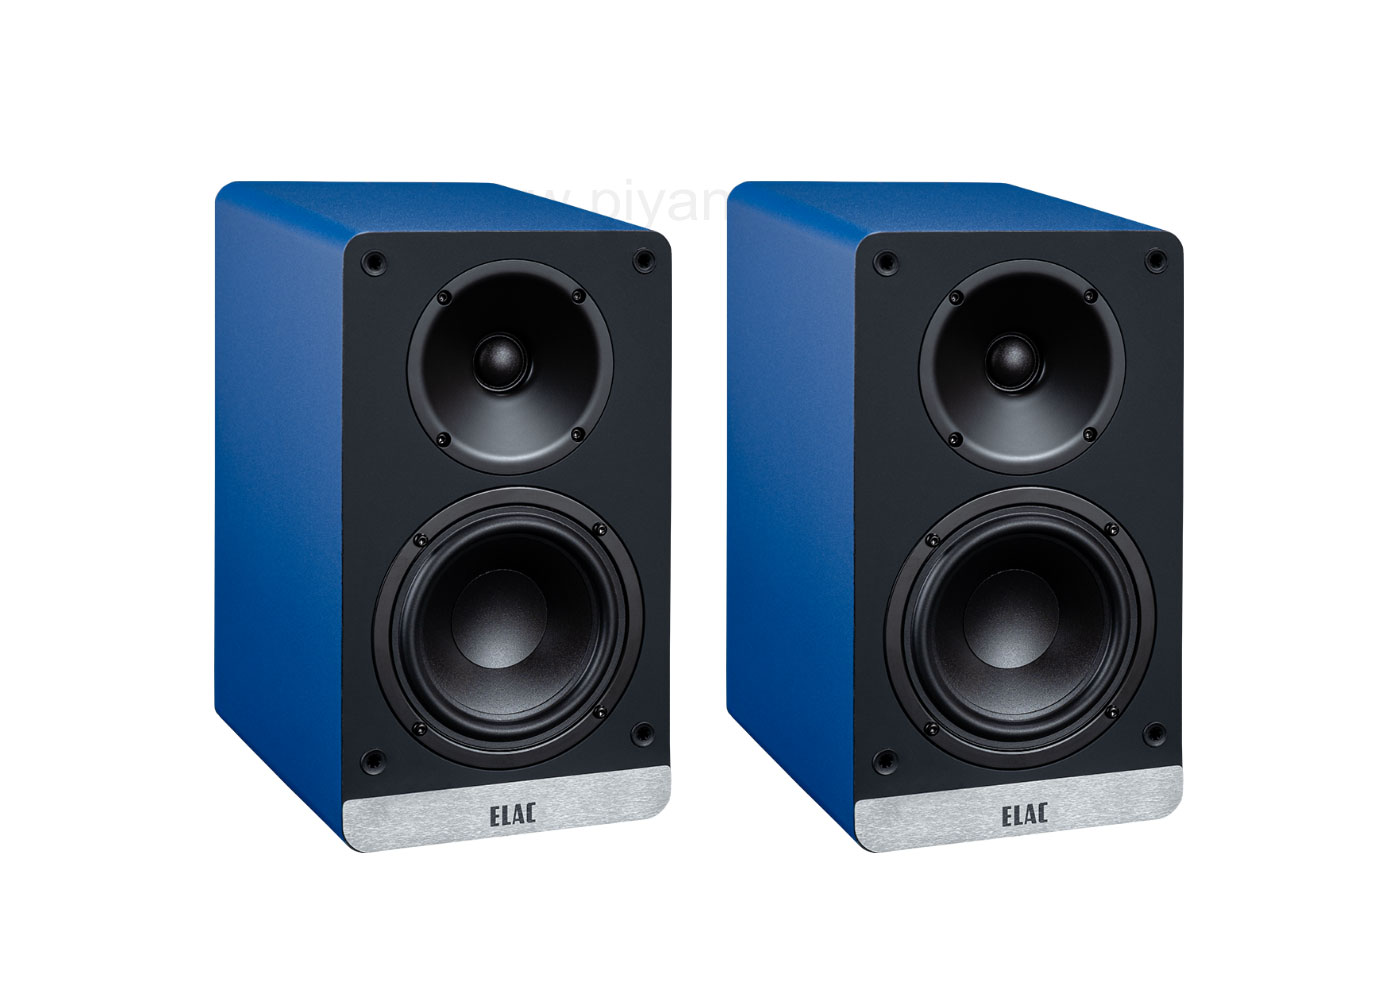 Debut Connex Dcb-41 
Powered Speakers (Blue)